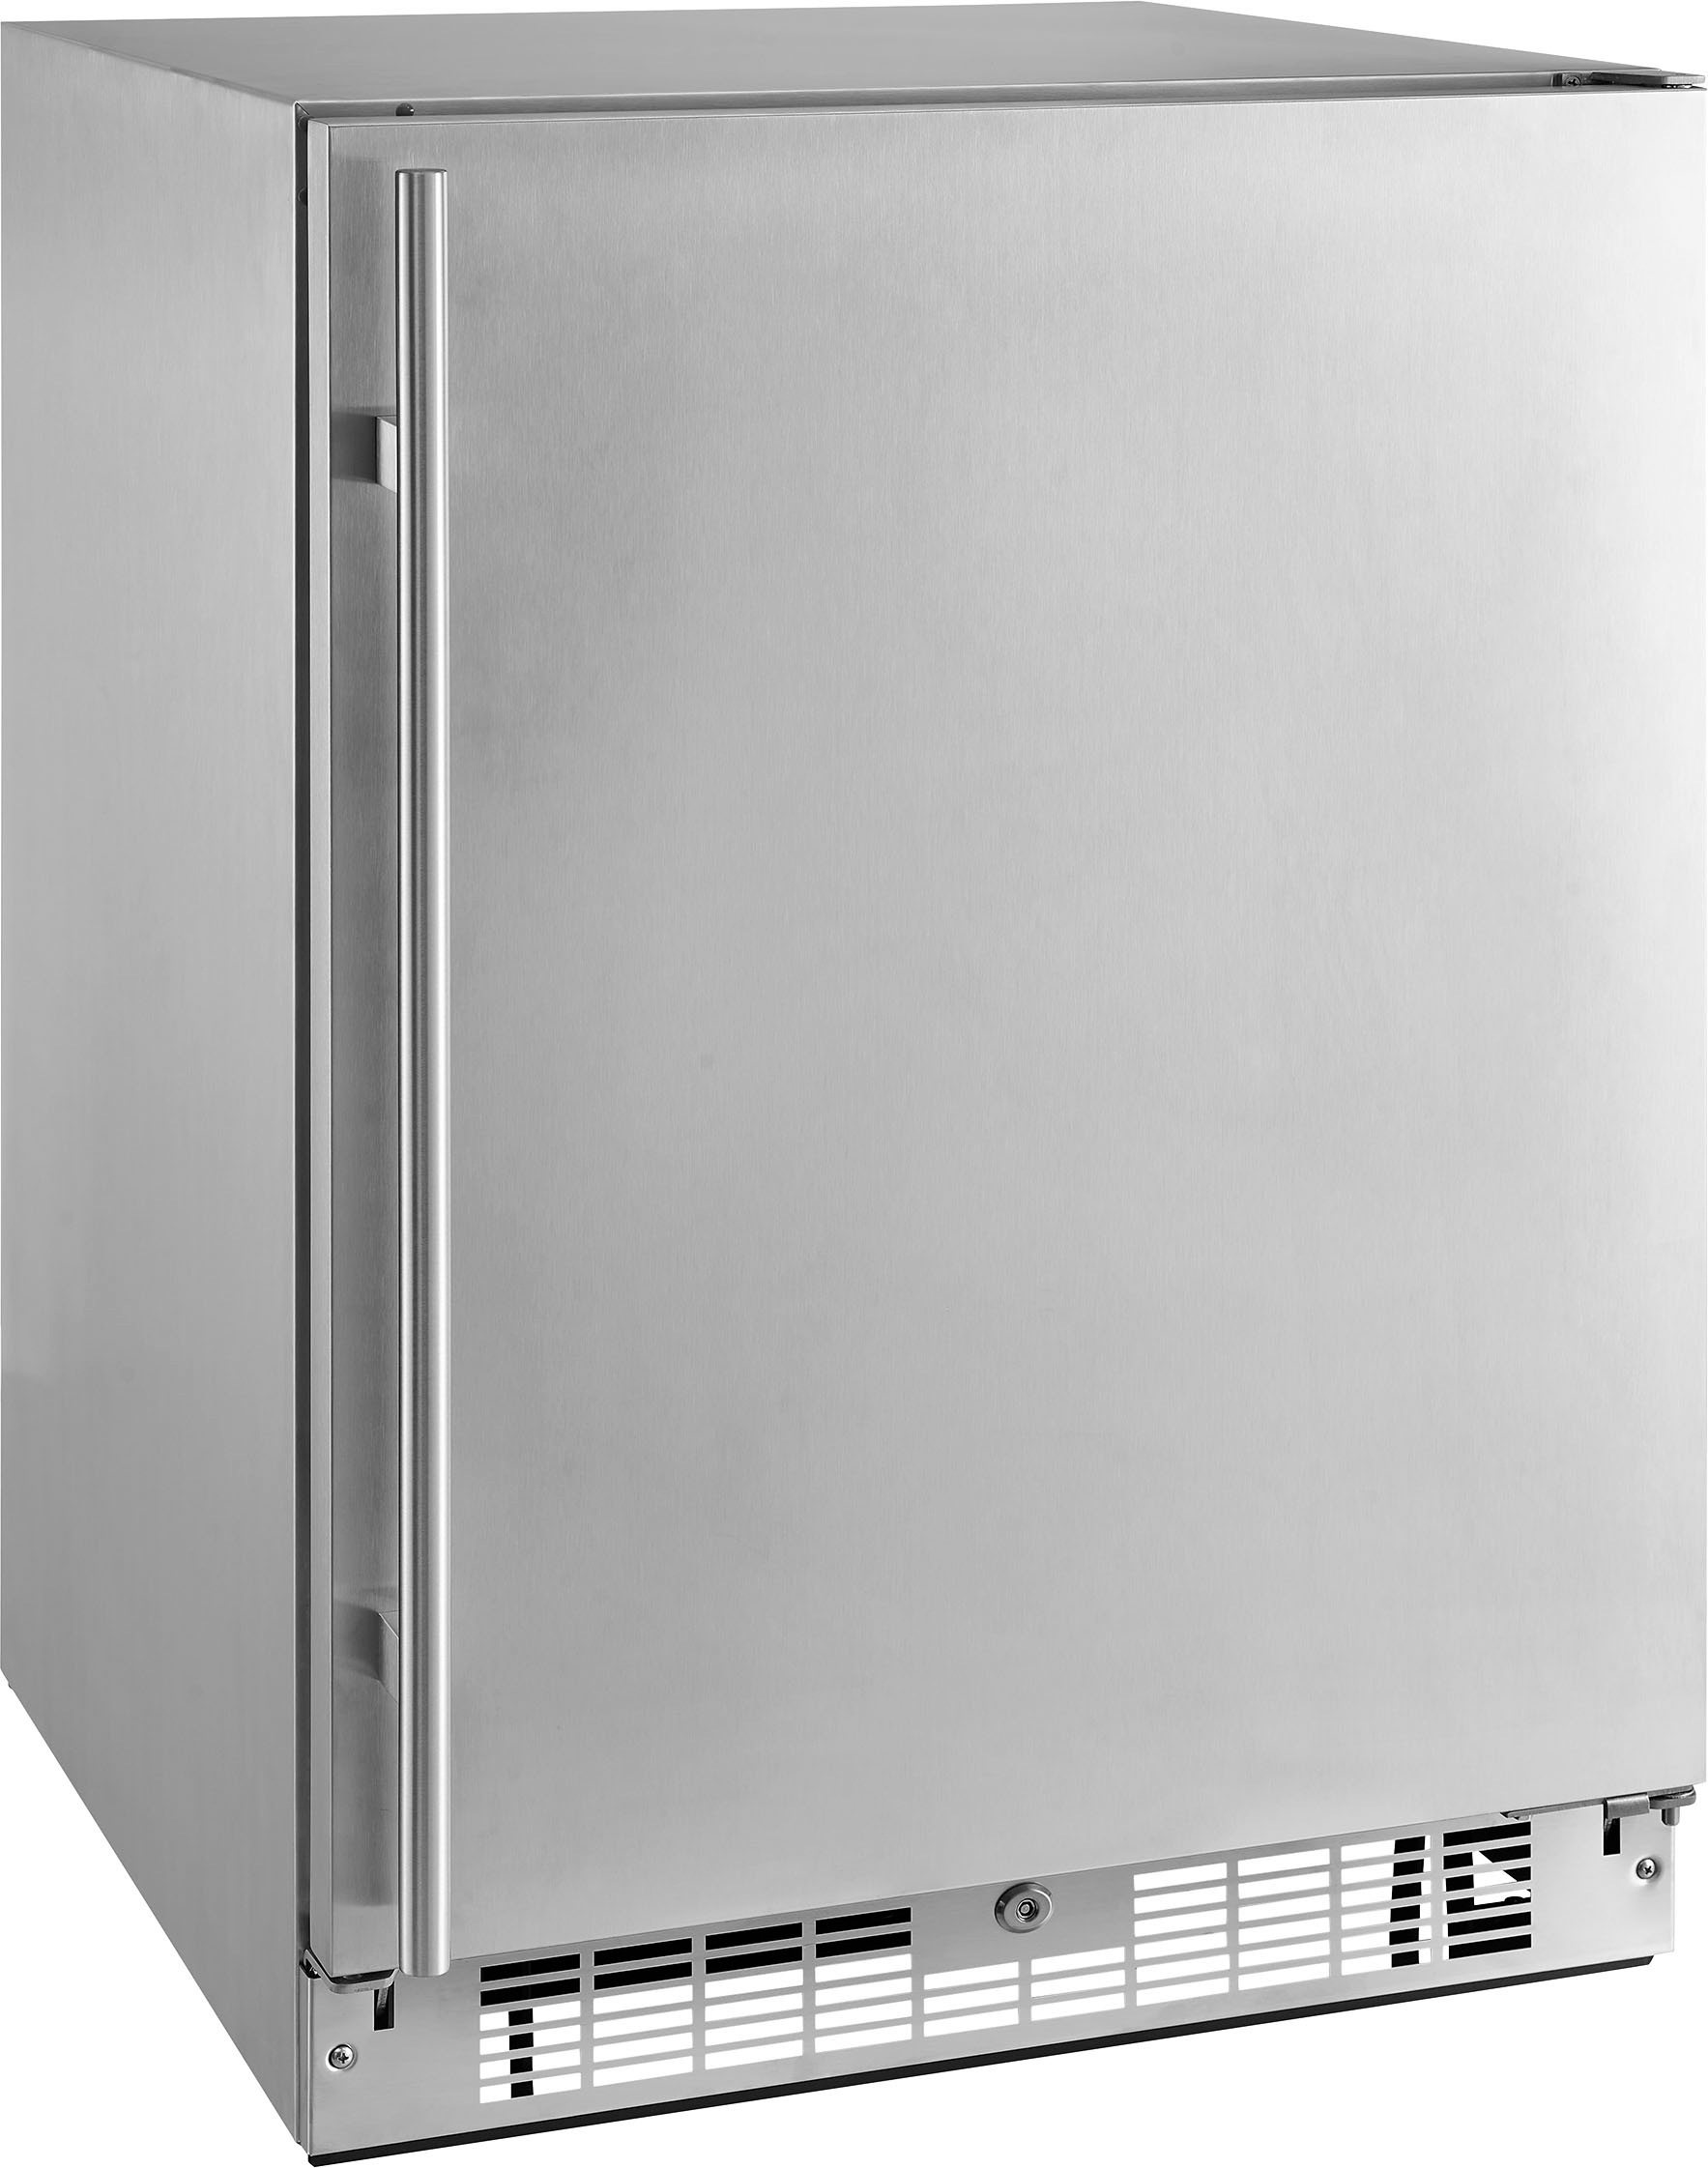 Angle View: Insignia™ - 5.4 Cu. Ft. Indoor/Outdoor Mini Fridge - Stainless Steel